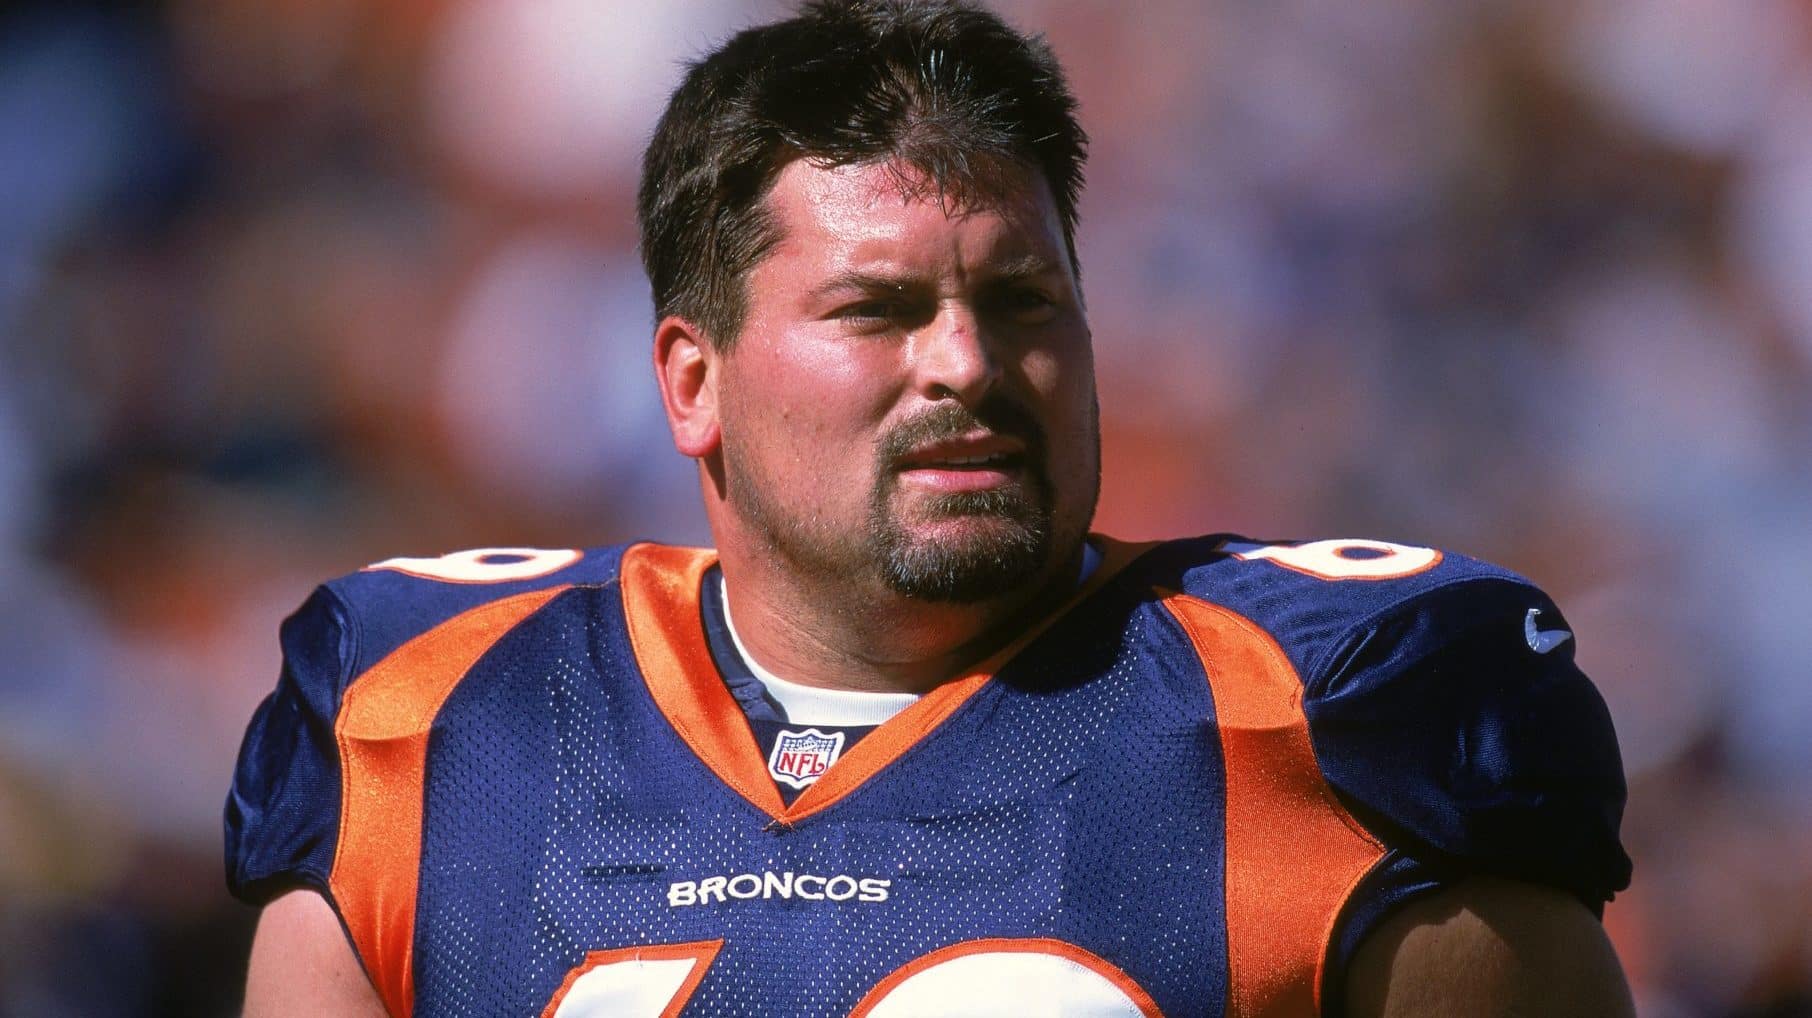 15 Oct 2000: Mark Schlereth #69 of the Denver Broncos looks on the field during the game against the Cleveland Browns at the Mile High Stadium in Denver, Colorado. The Broncos defeated the Browns 44-10.